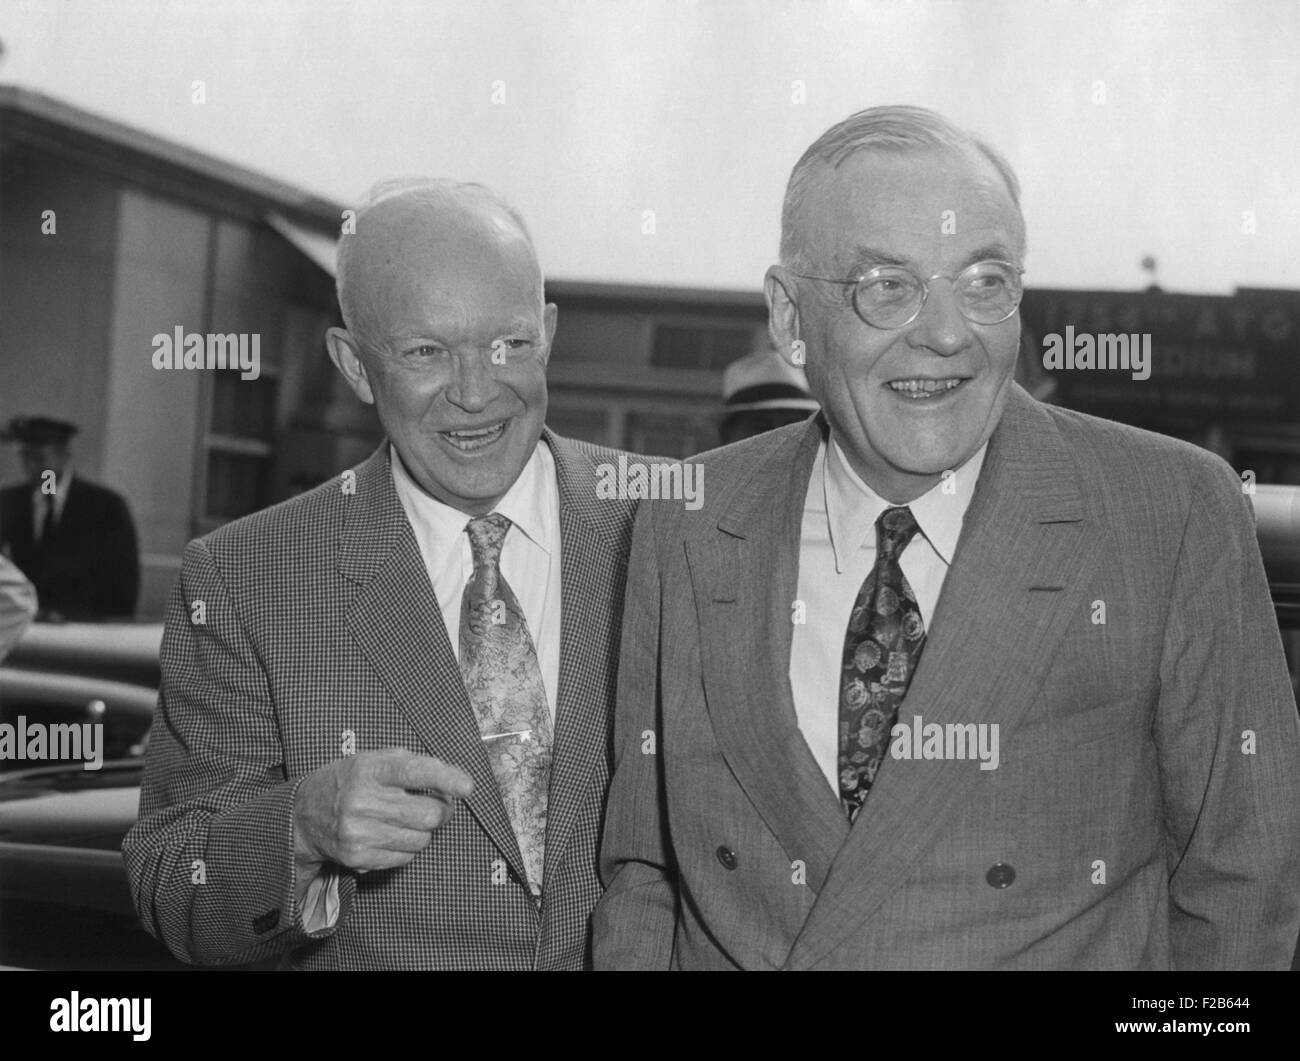 President Eisenhower with Secretary of State John Foster Dulles at Washington Airport. The President was seeing Dulles off for European Trip. July 25, 1958. - (BSLOC 2014 16 138) Stock Photo